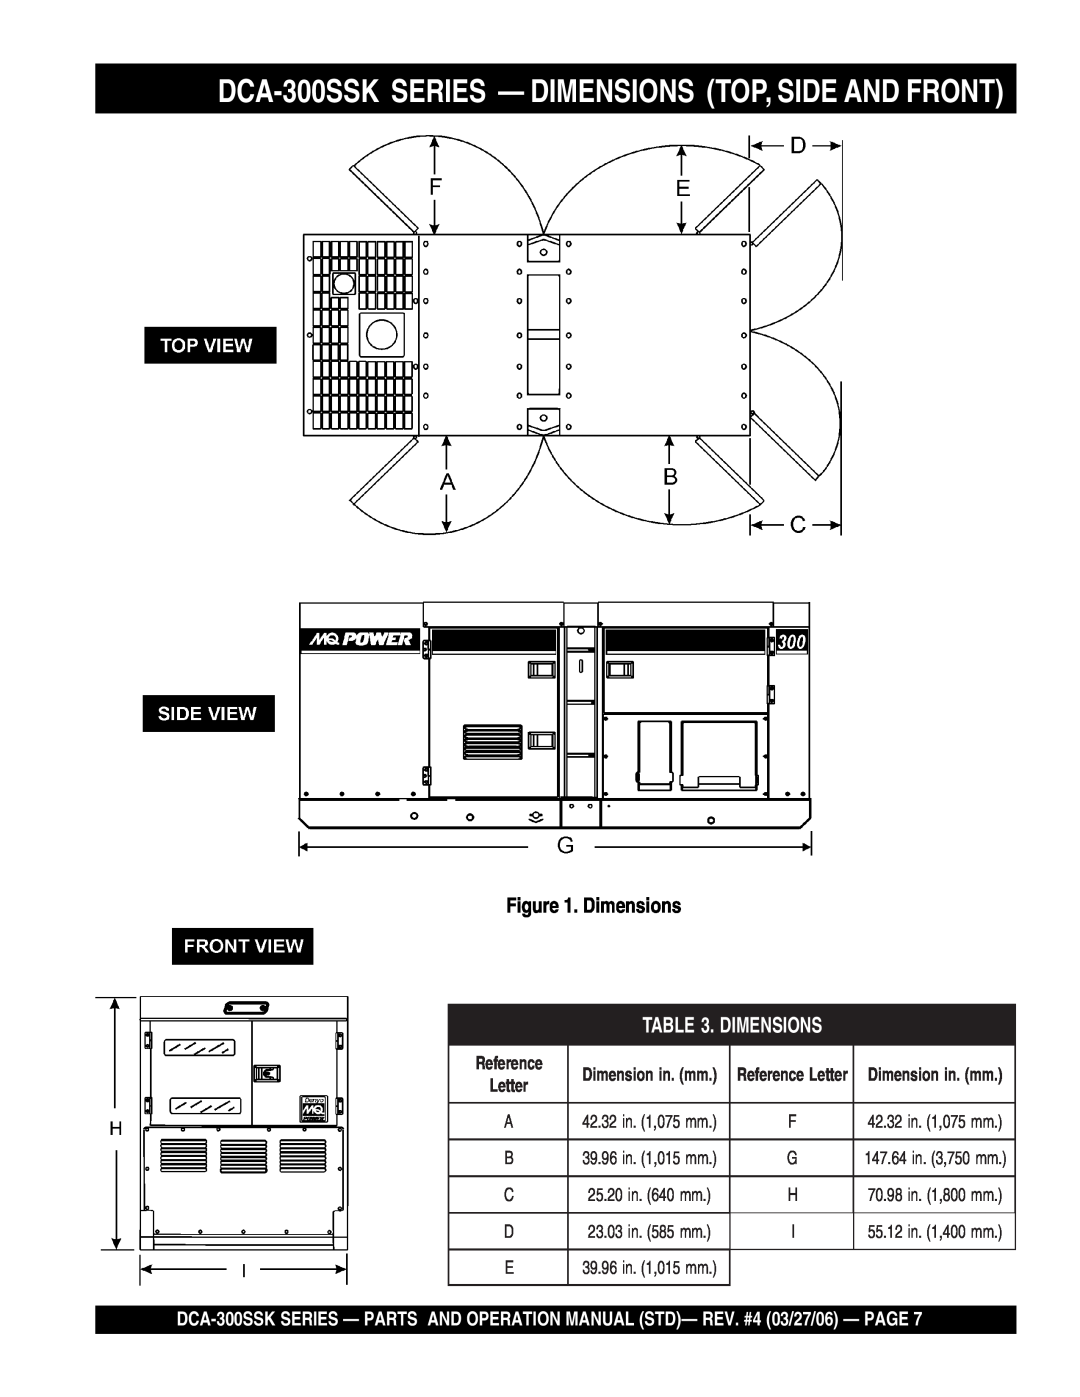 Multiquip manual DCA-300SSK SERIES - DIMENSIONS TOP, SIDE AND FRONT, Dimensions, Reference, Dimension in. mm 